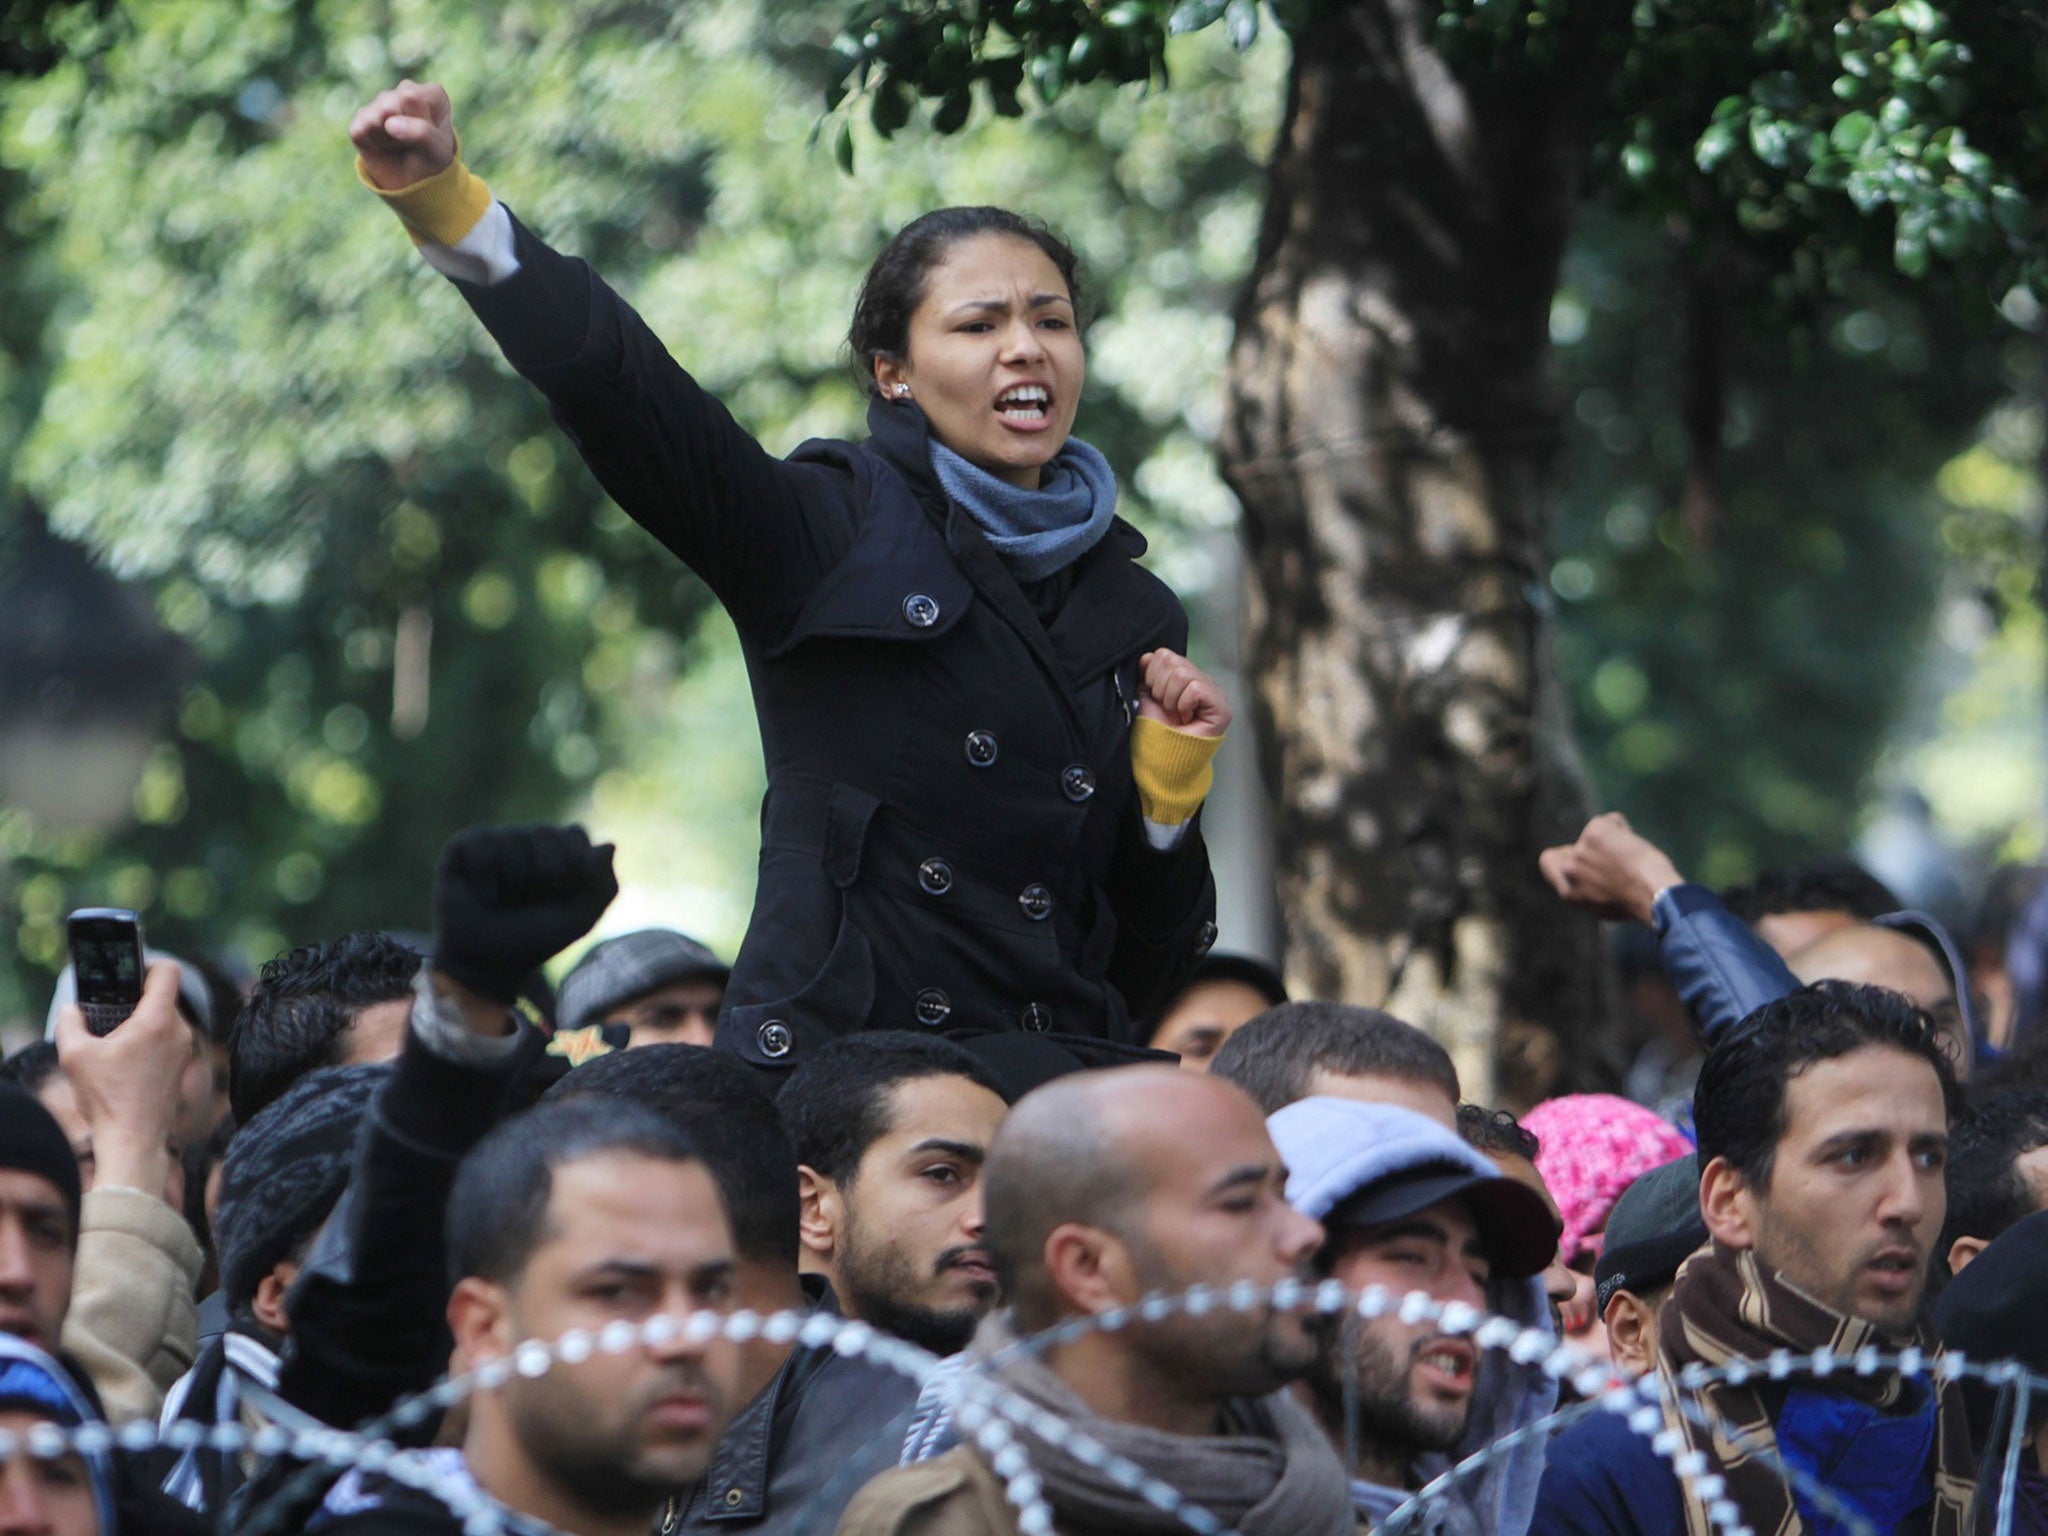 A demonstrator raises her fist during a demonstration in Tunis